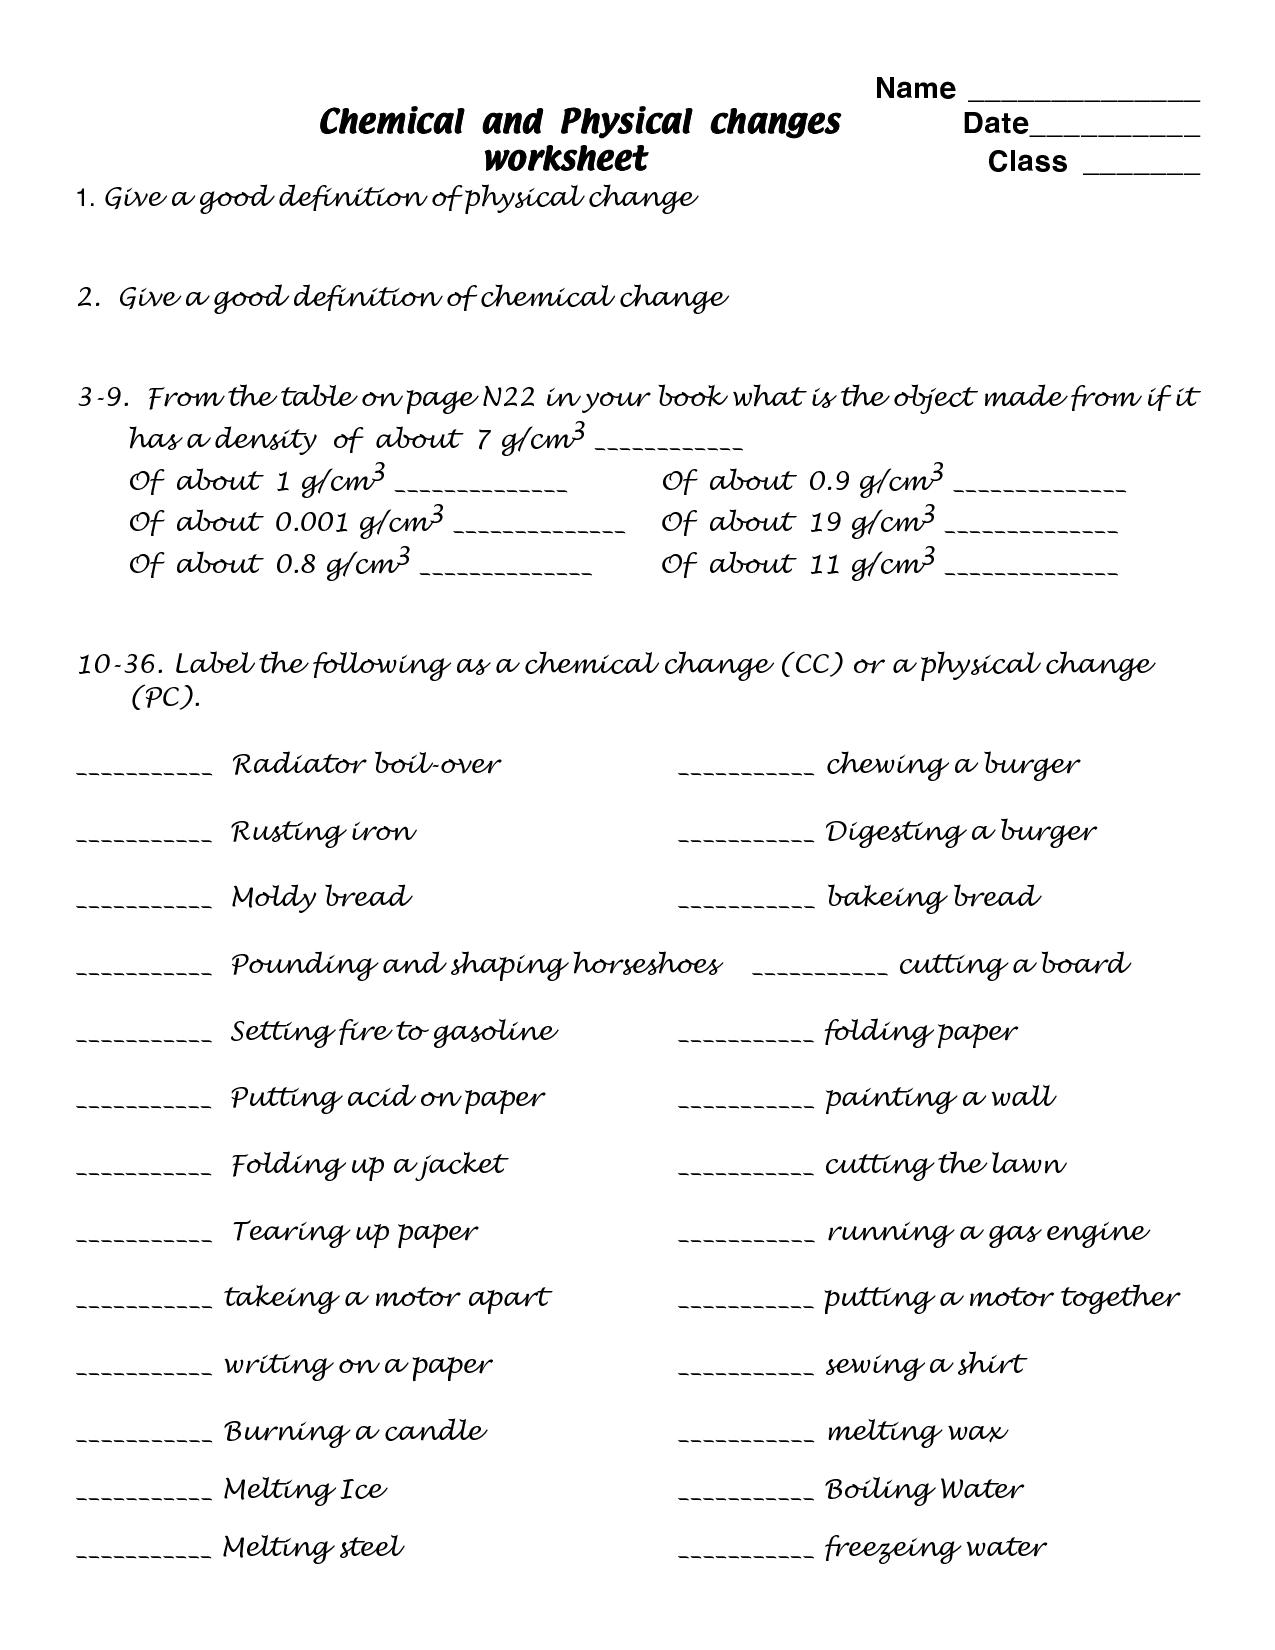 lab chemical and physical changes worksheet answers